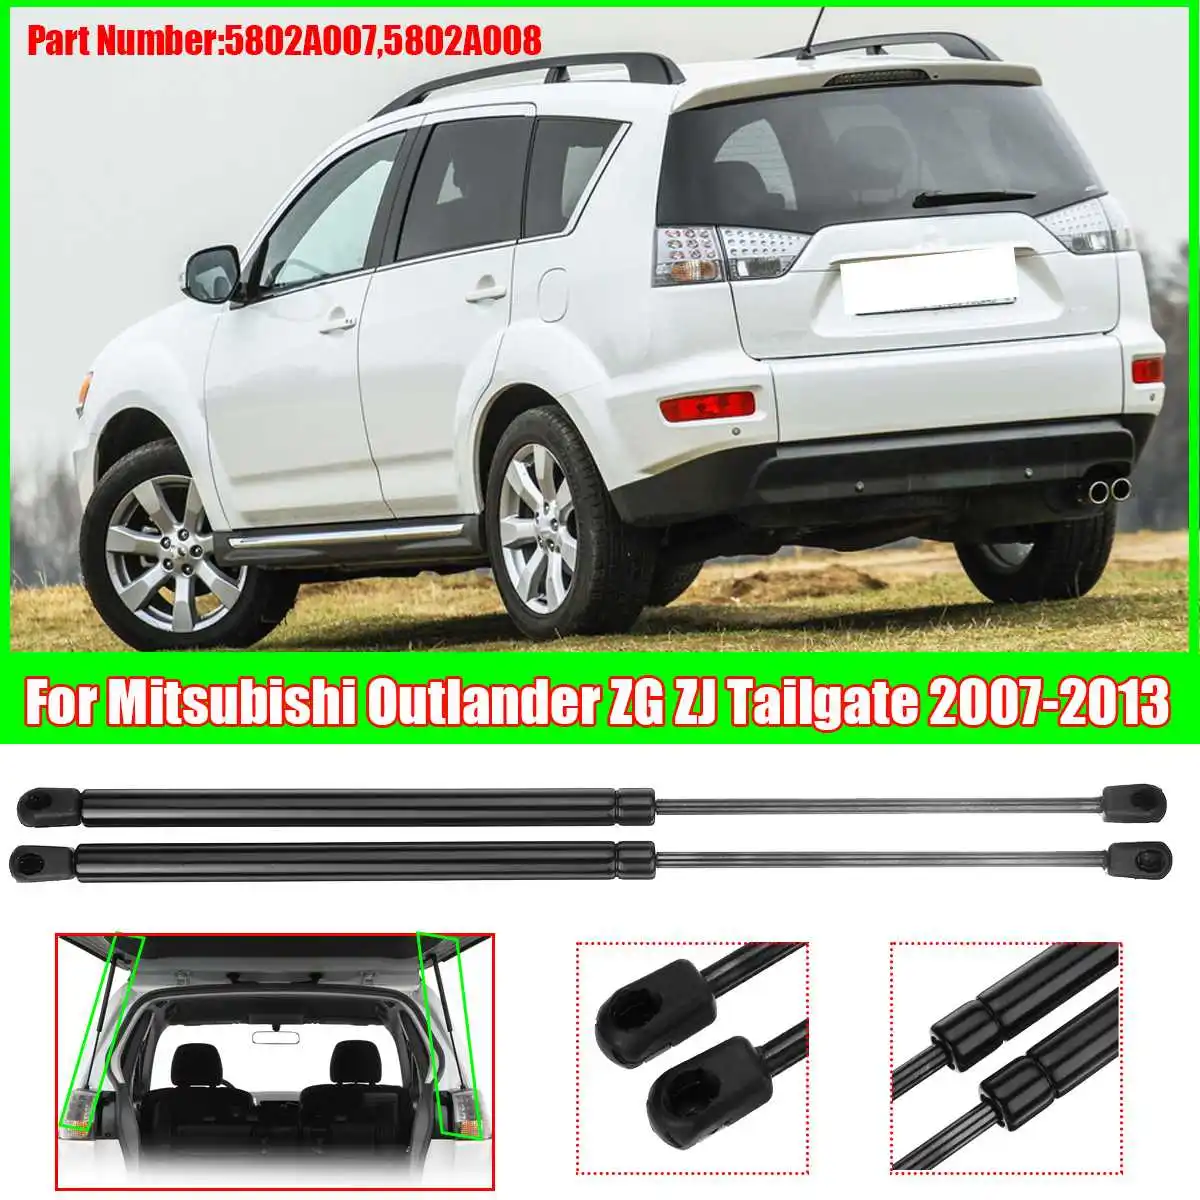 2Pcs For Mitsubishi Outlander 2007 2008 2009 2010 2011 2012 2013 Car styling Tailgate Gas Spring Rear Trunk Gas Struts 5802A007